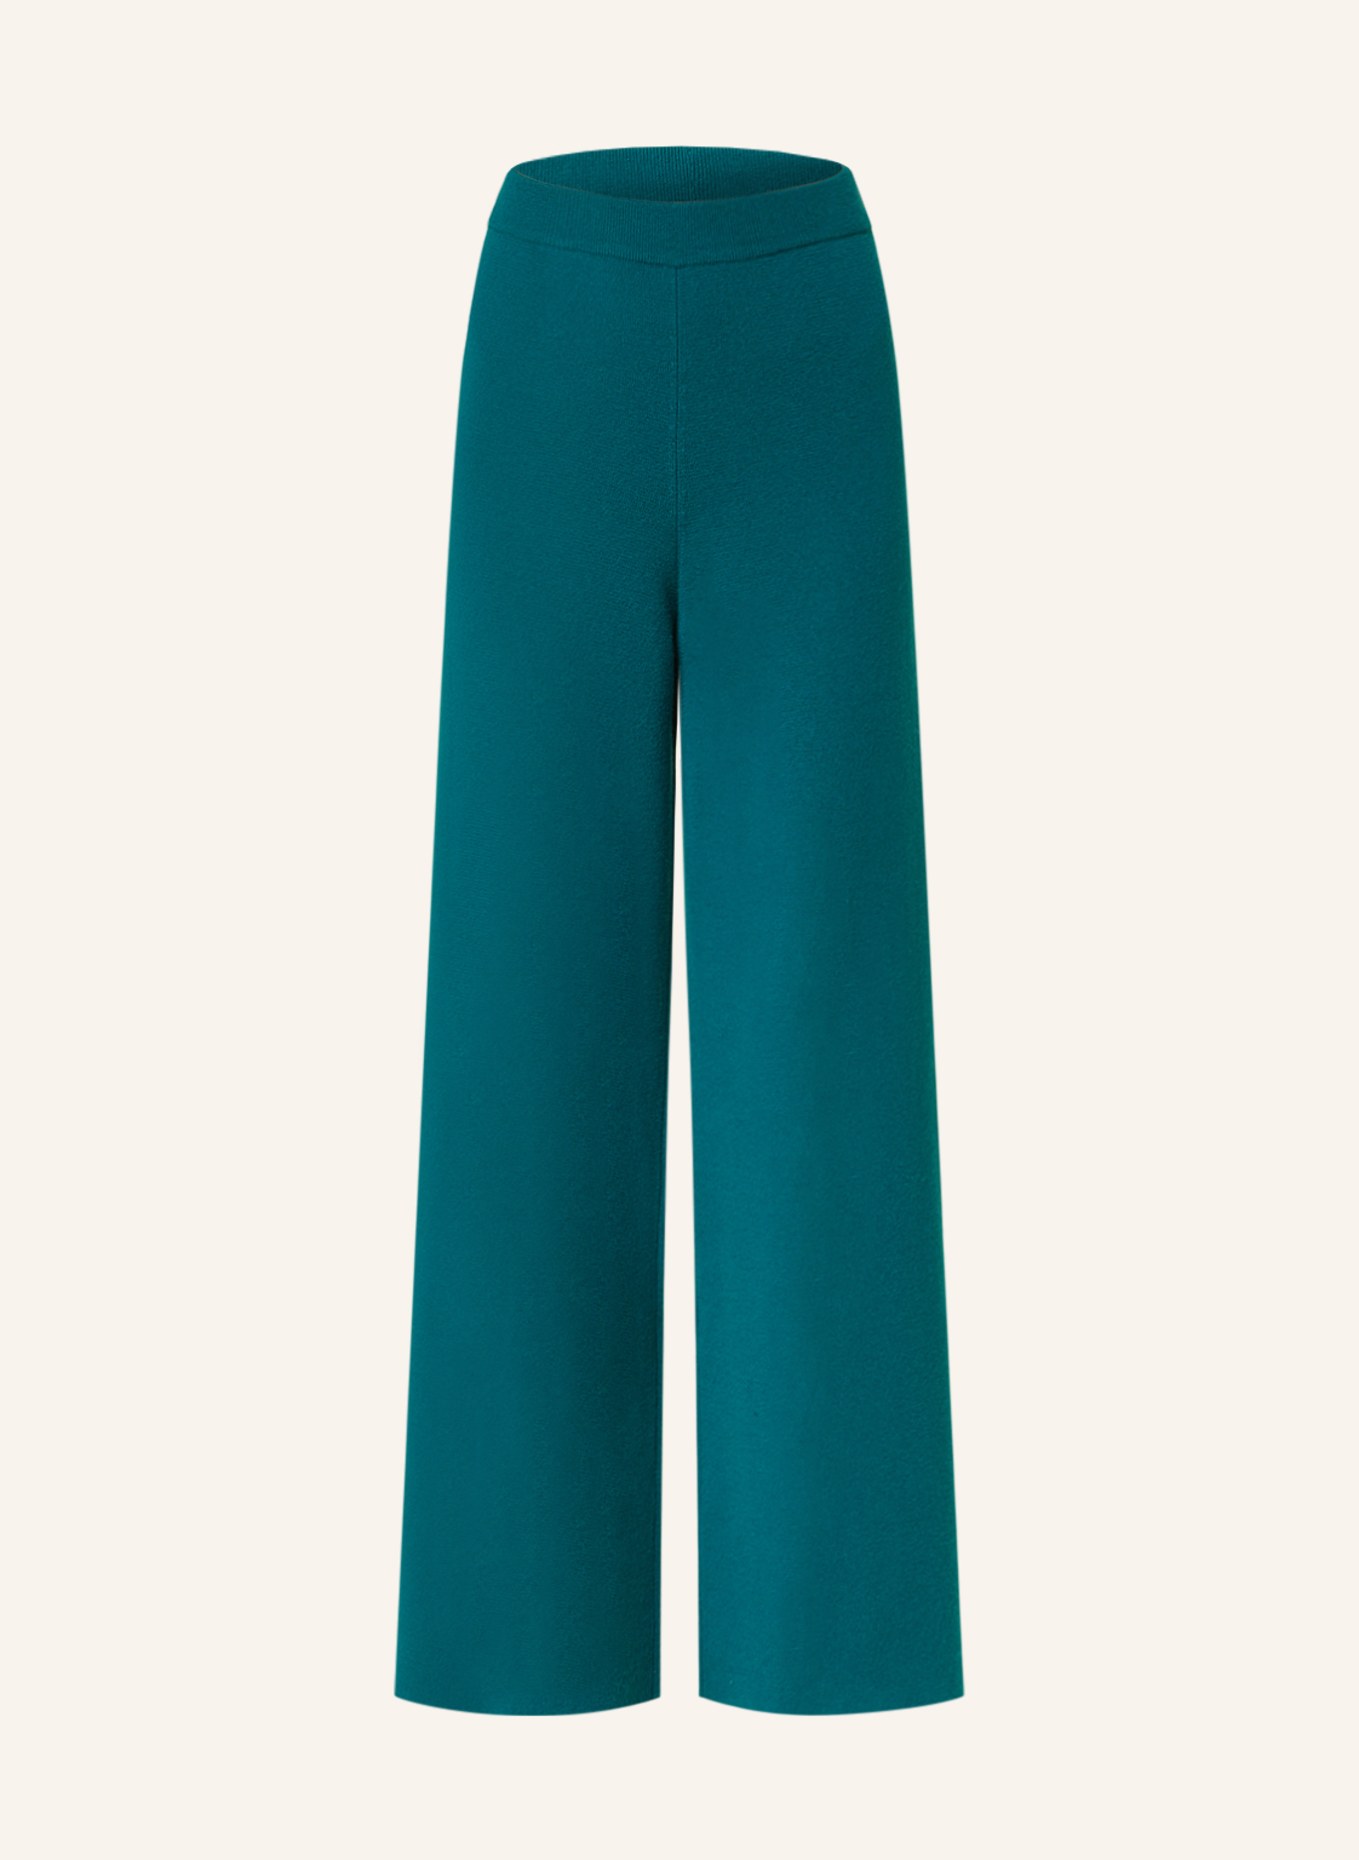 SEM PER LEI Knit trousers with cashmere, Color: TEAL (Image 1)